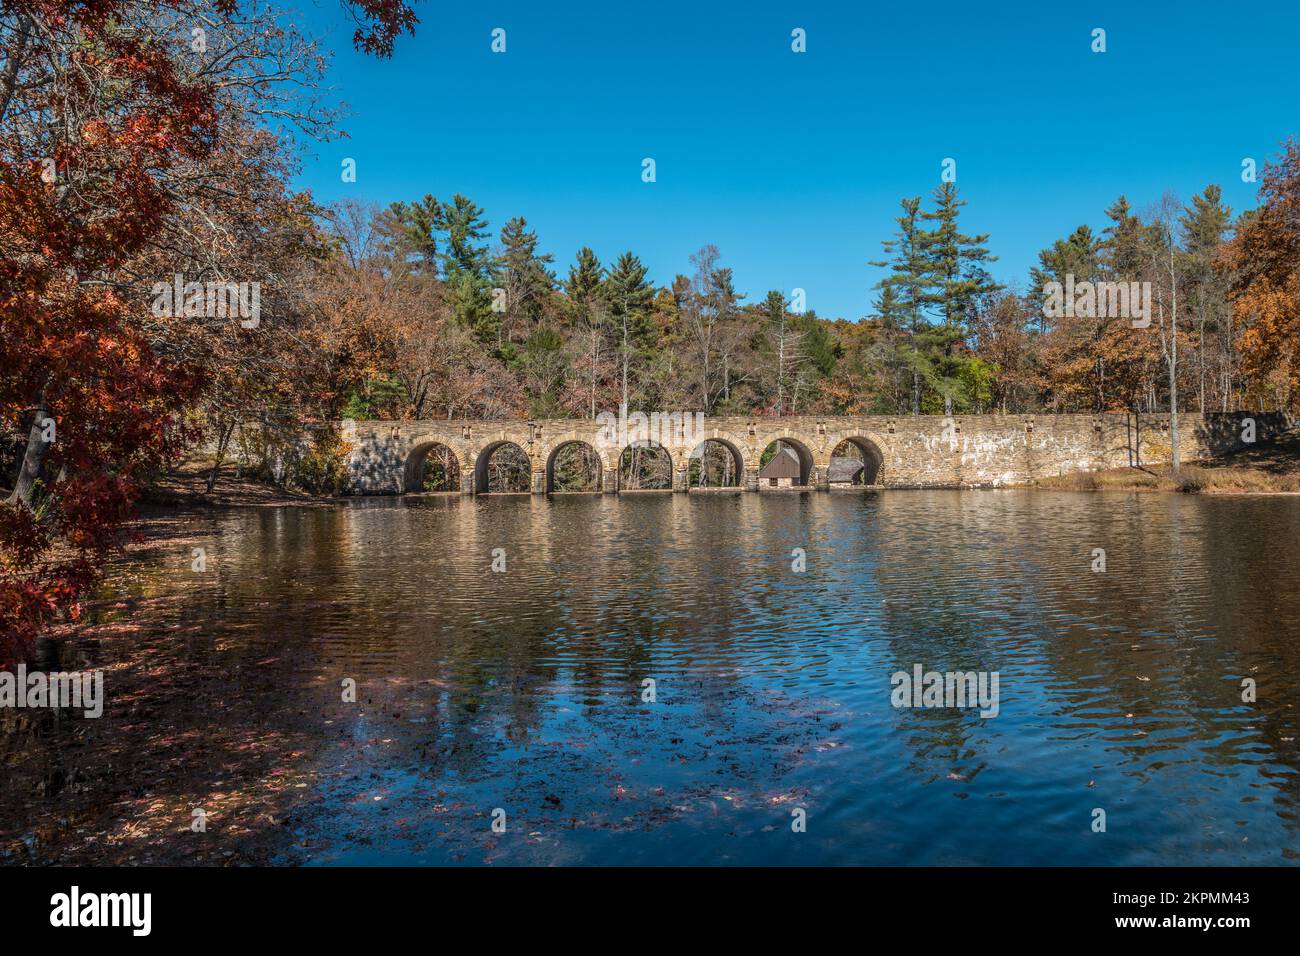 A picturesque view in autumn of the seven arch stone bridge that crosses over a lake at the state park in Tennessee on a sunny day Stock Photo